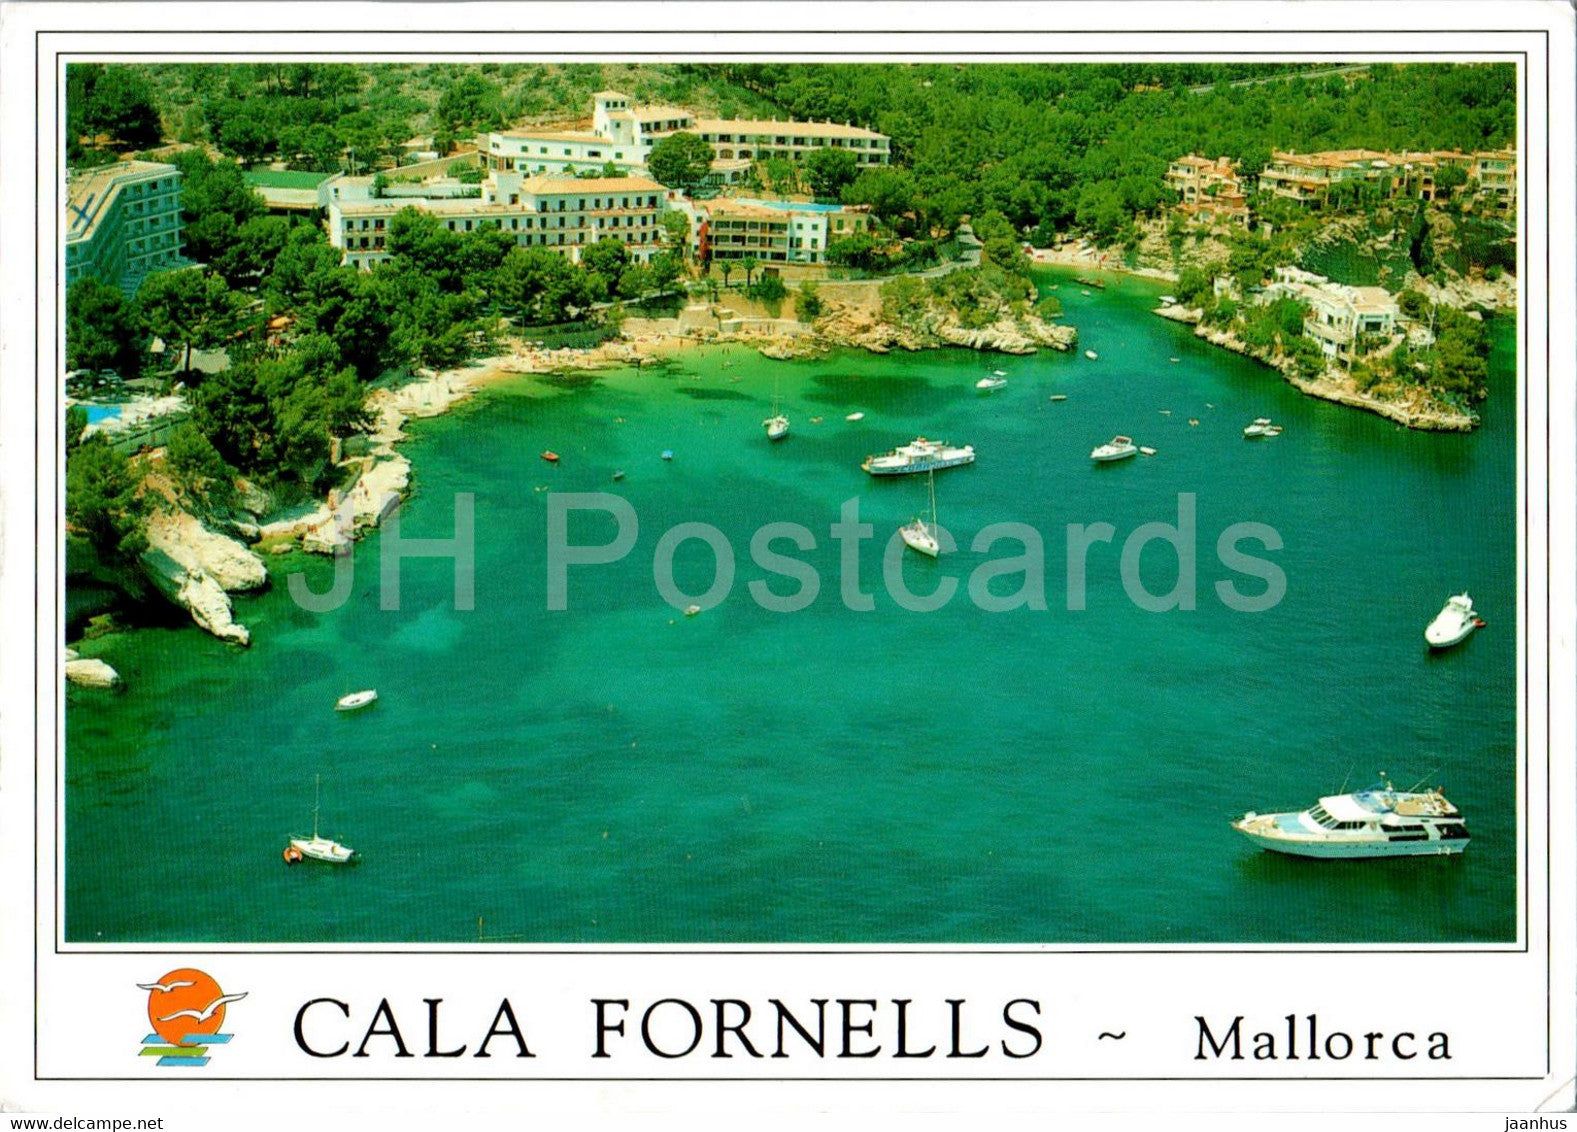 Cala Fornells - Paguera - Mallorca - 699 - Spain - used - JH Postcards